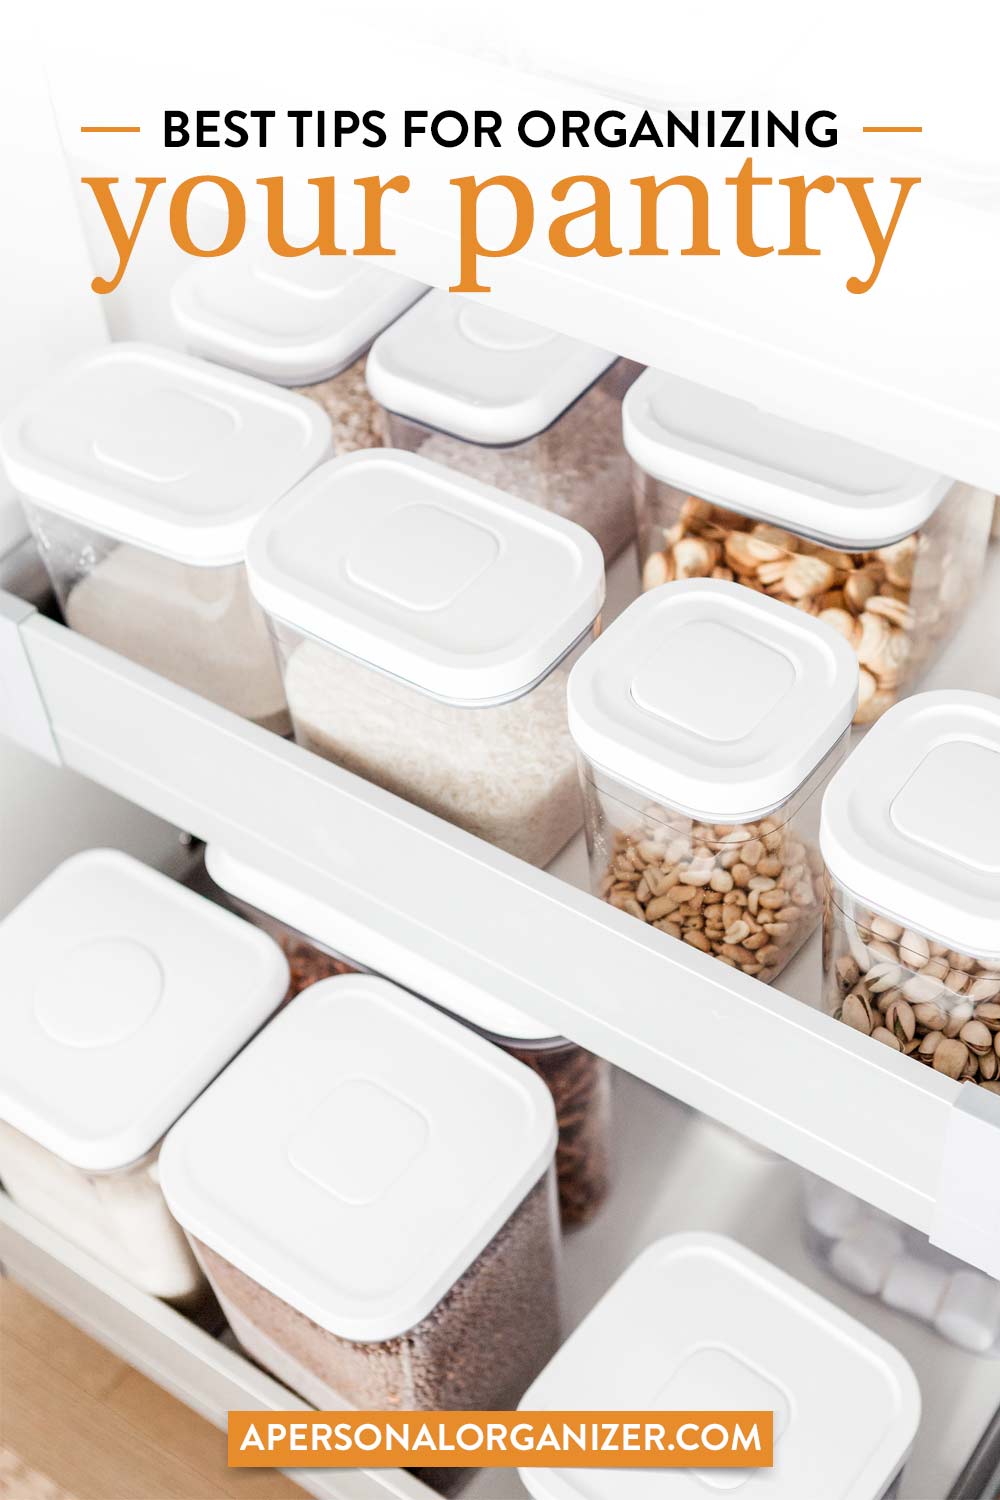 How To Organize The Pantry From Top To Bottom